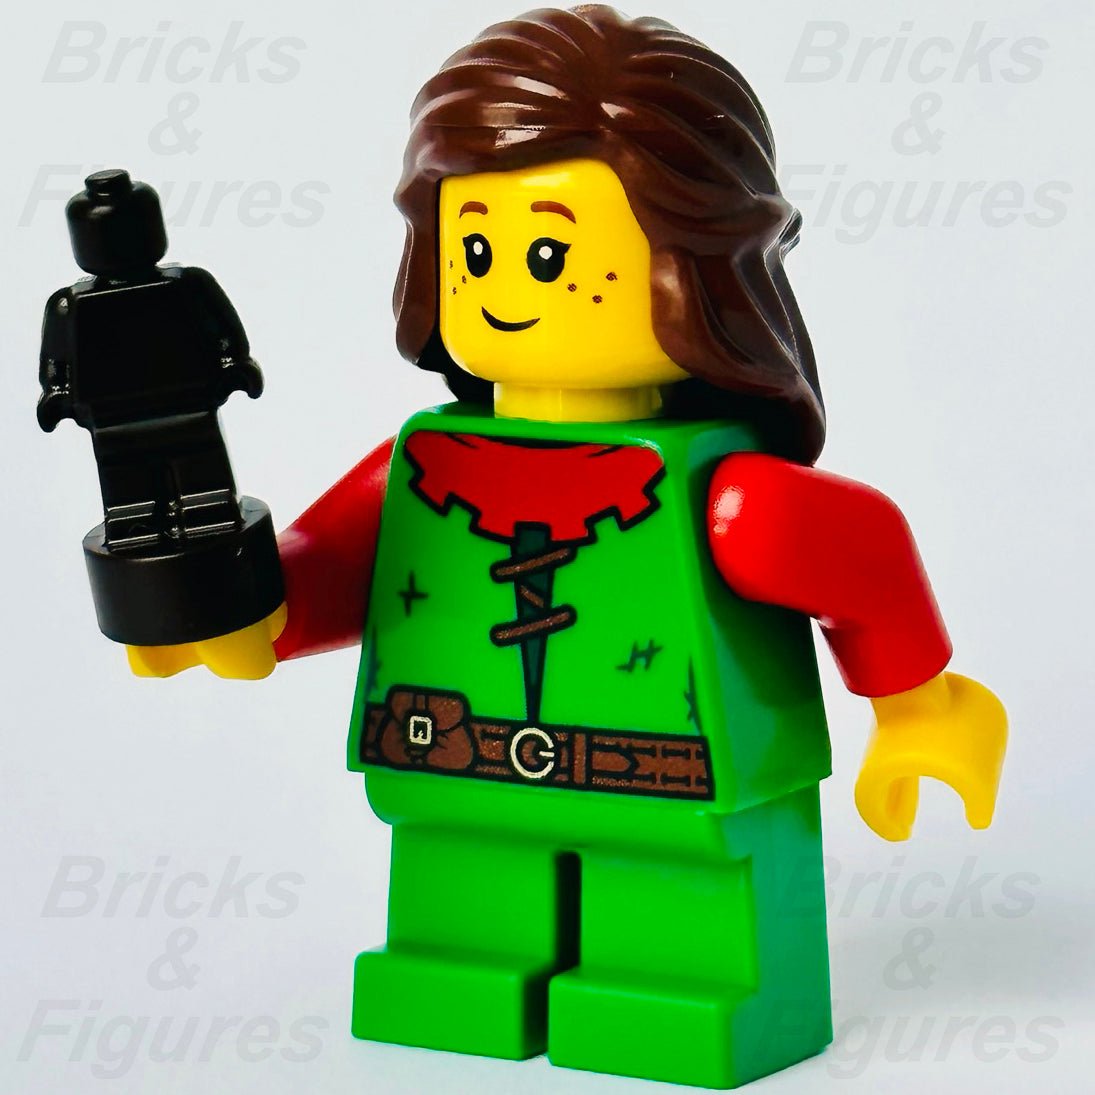 LEGO Forest Girl Castle Forestmen Minifigure with Statuette 10305 cas5